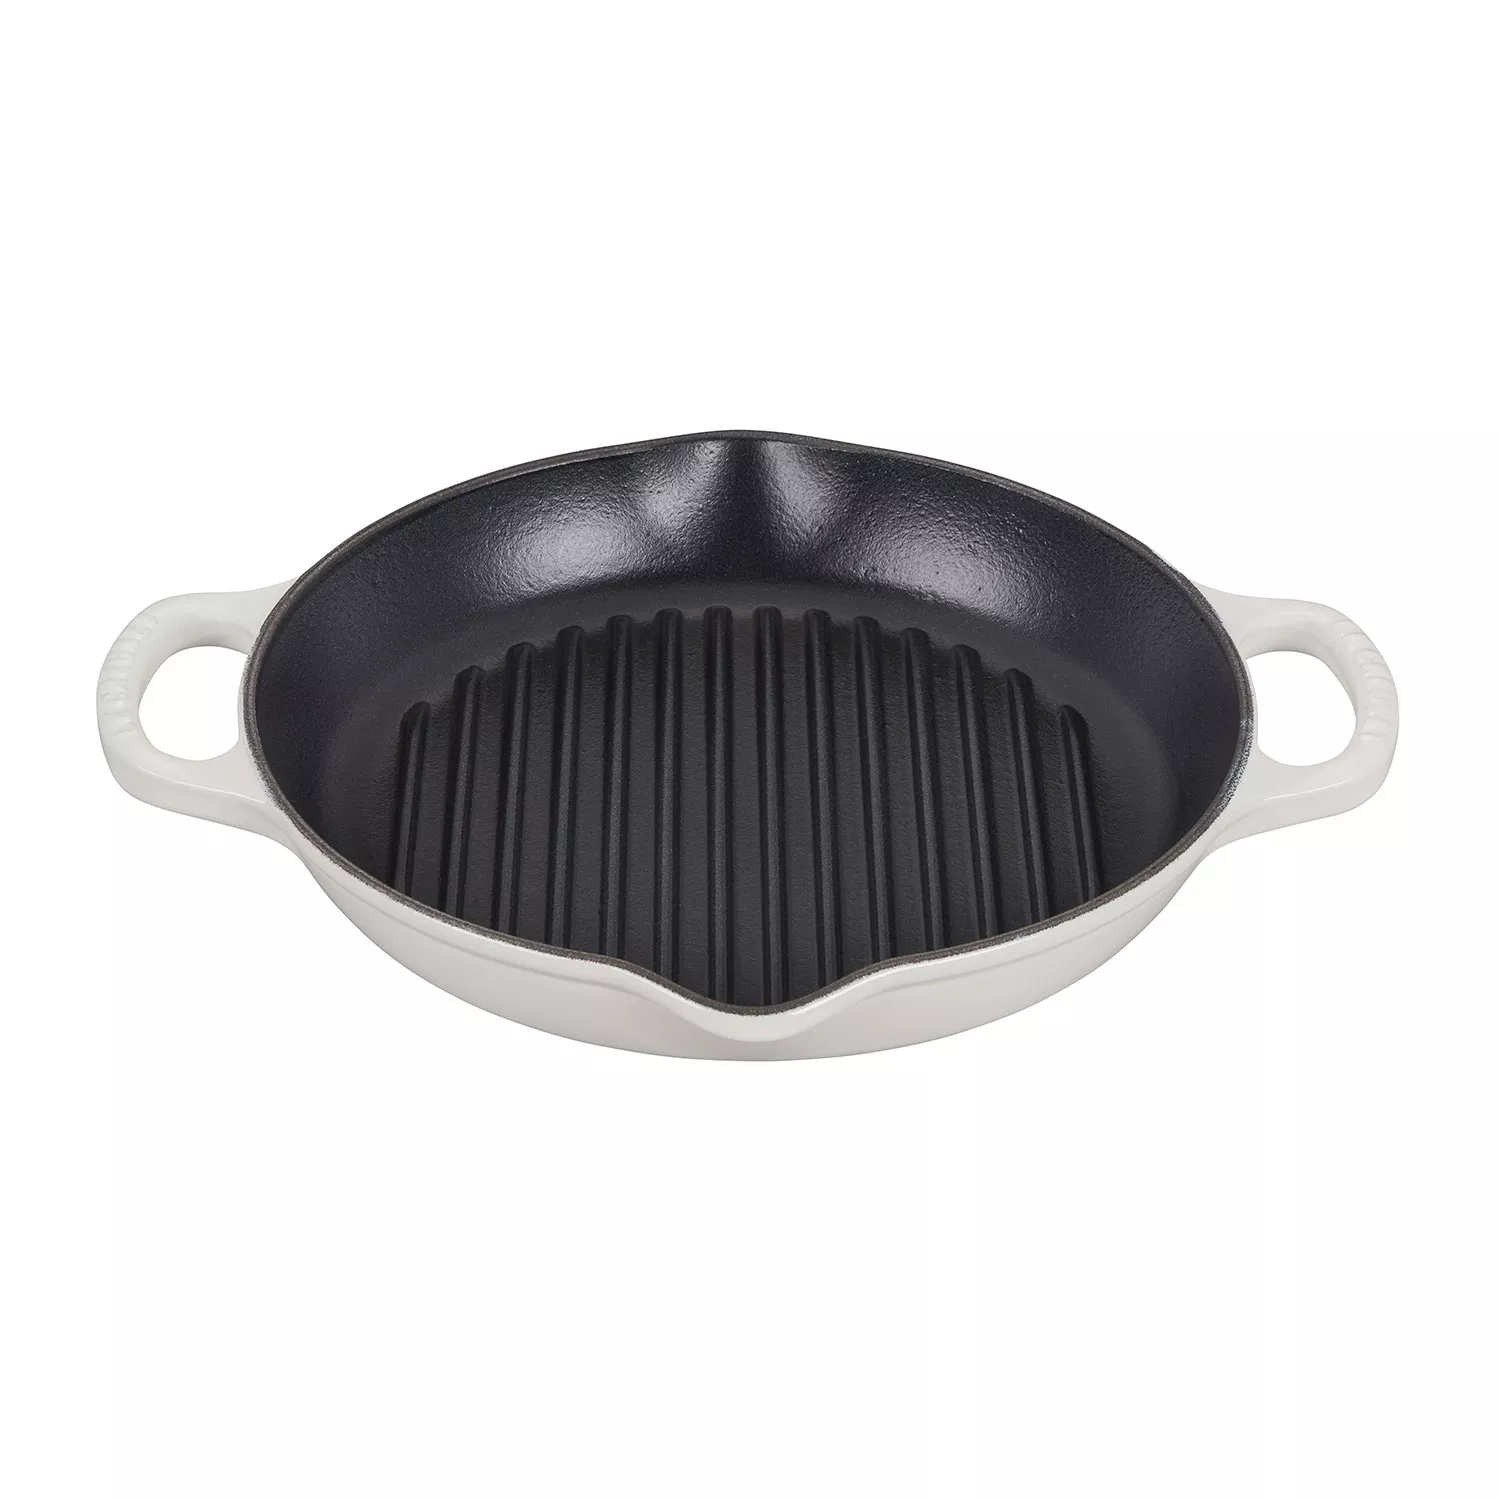 Enameled Deep Round Grill Cast Iron Griddle Pan with Glass Lid 10 Inch  Non-Stick Round